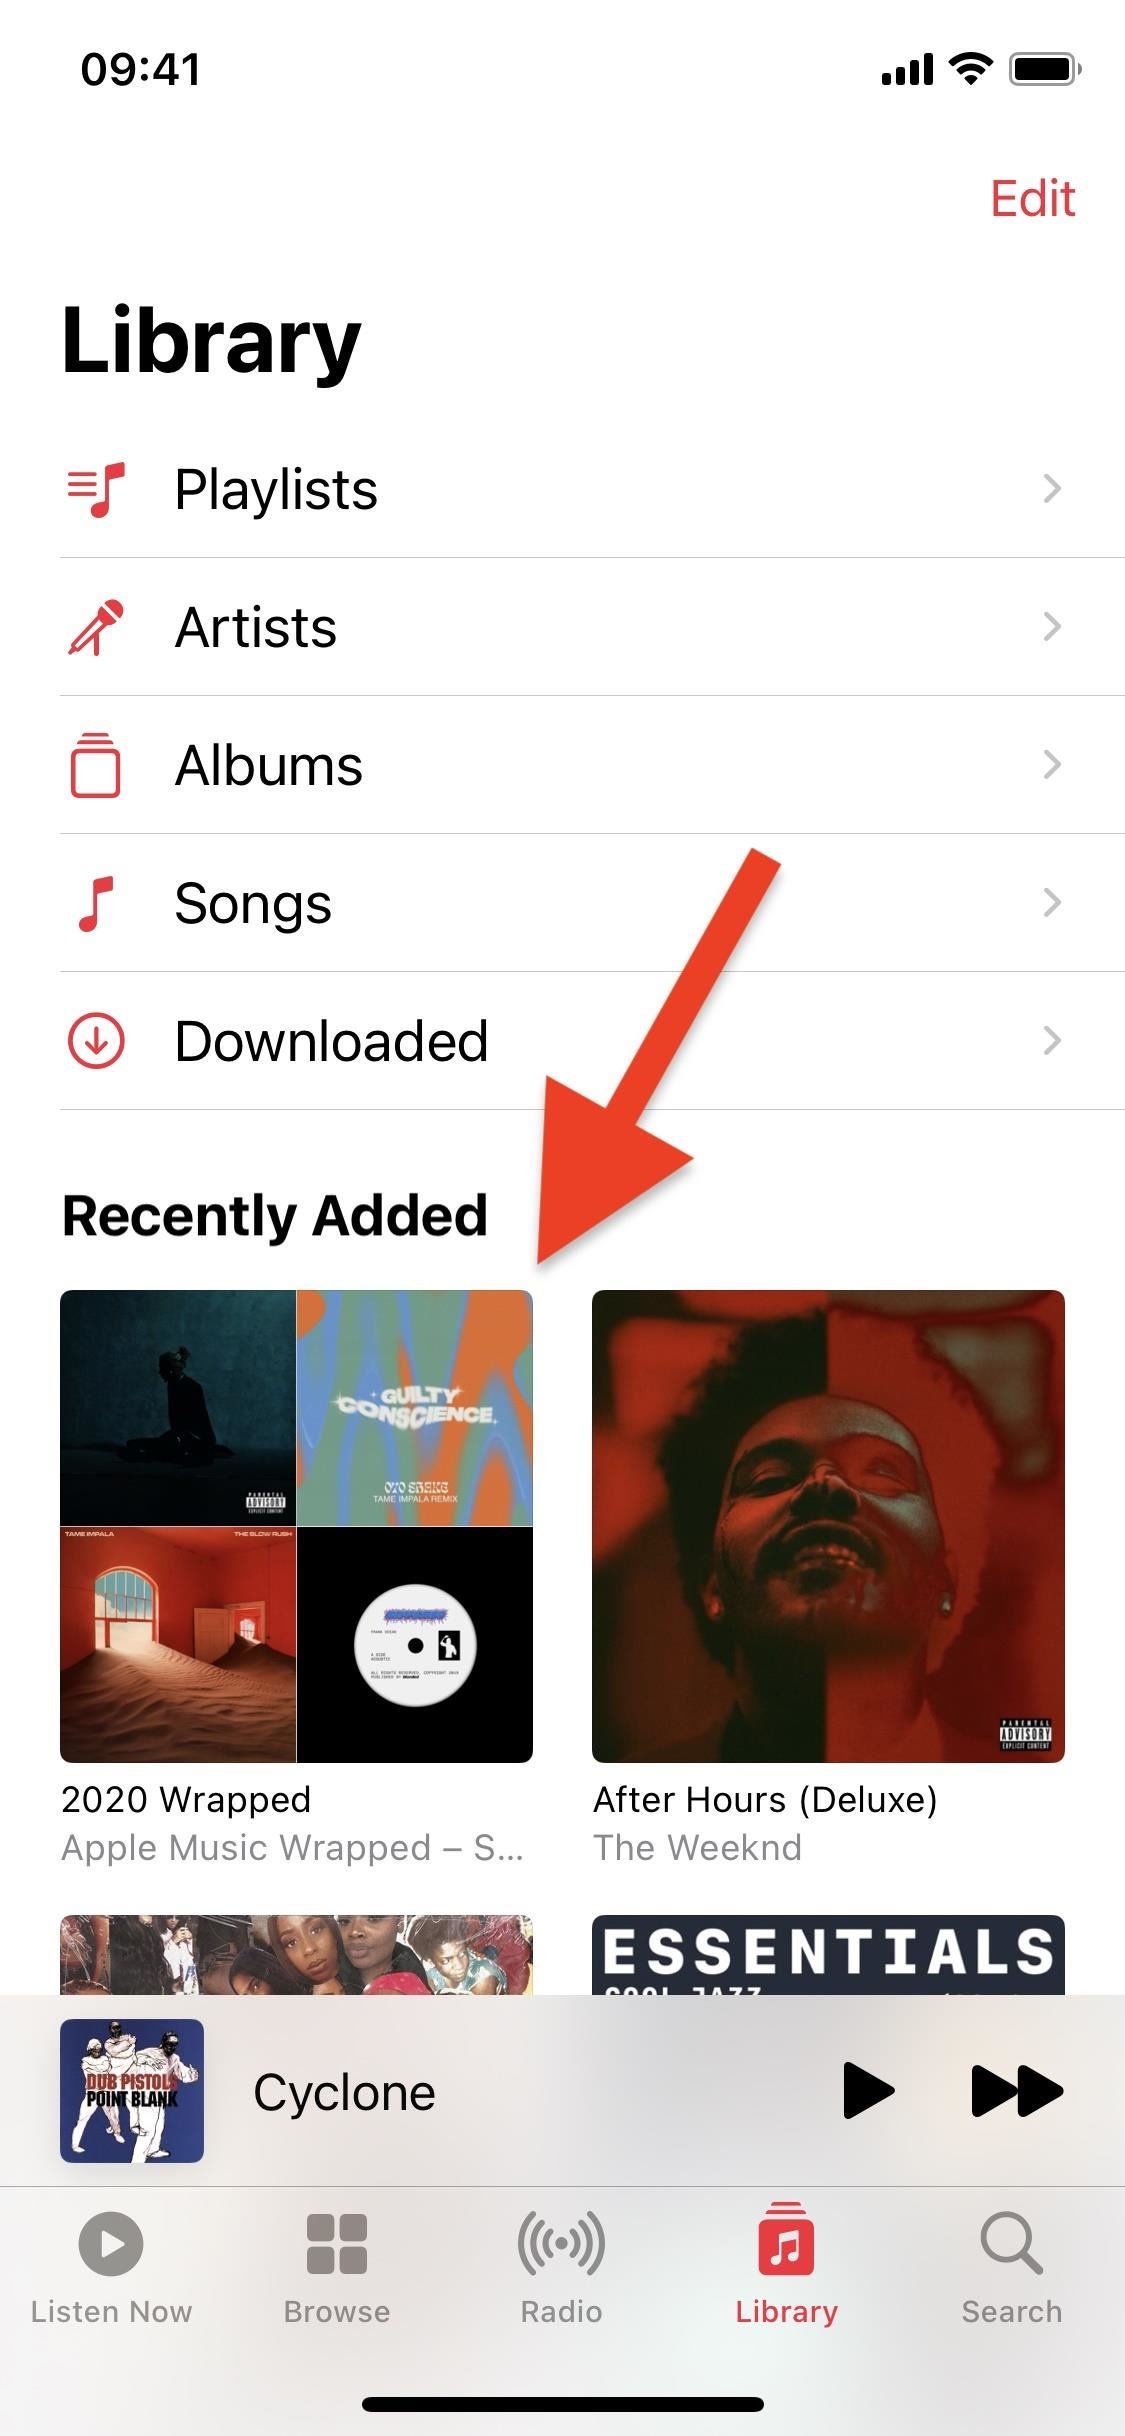 Use Apple Music Wrapped to View Your Most Played Songs in 2020 from Apple Music or Your iPhone's Library